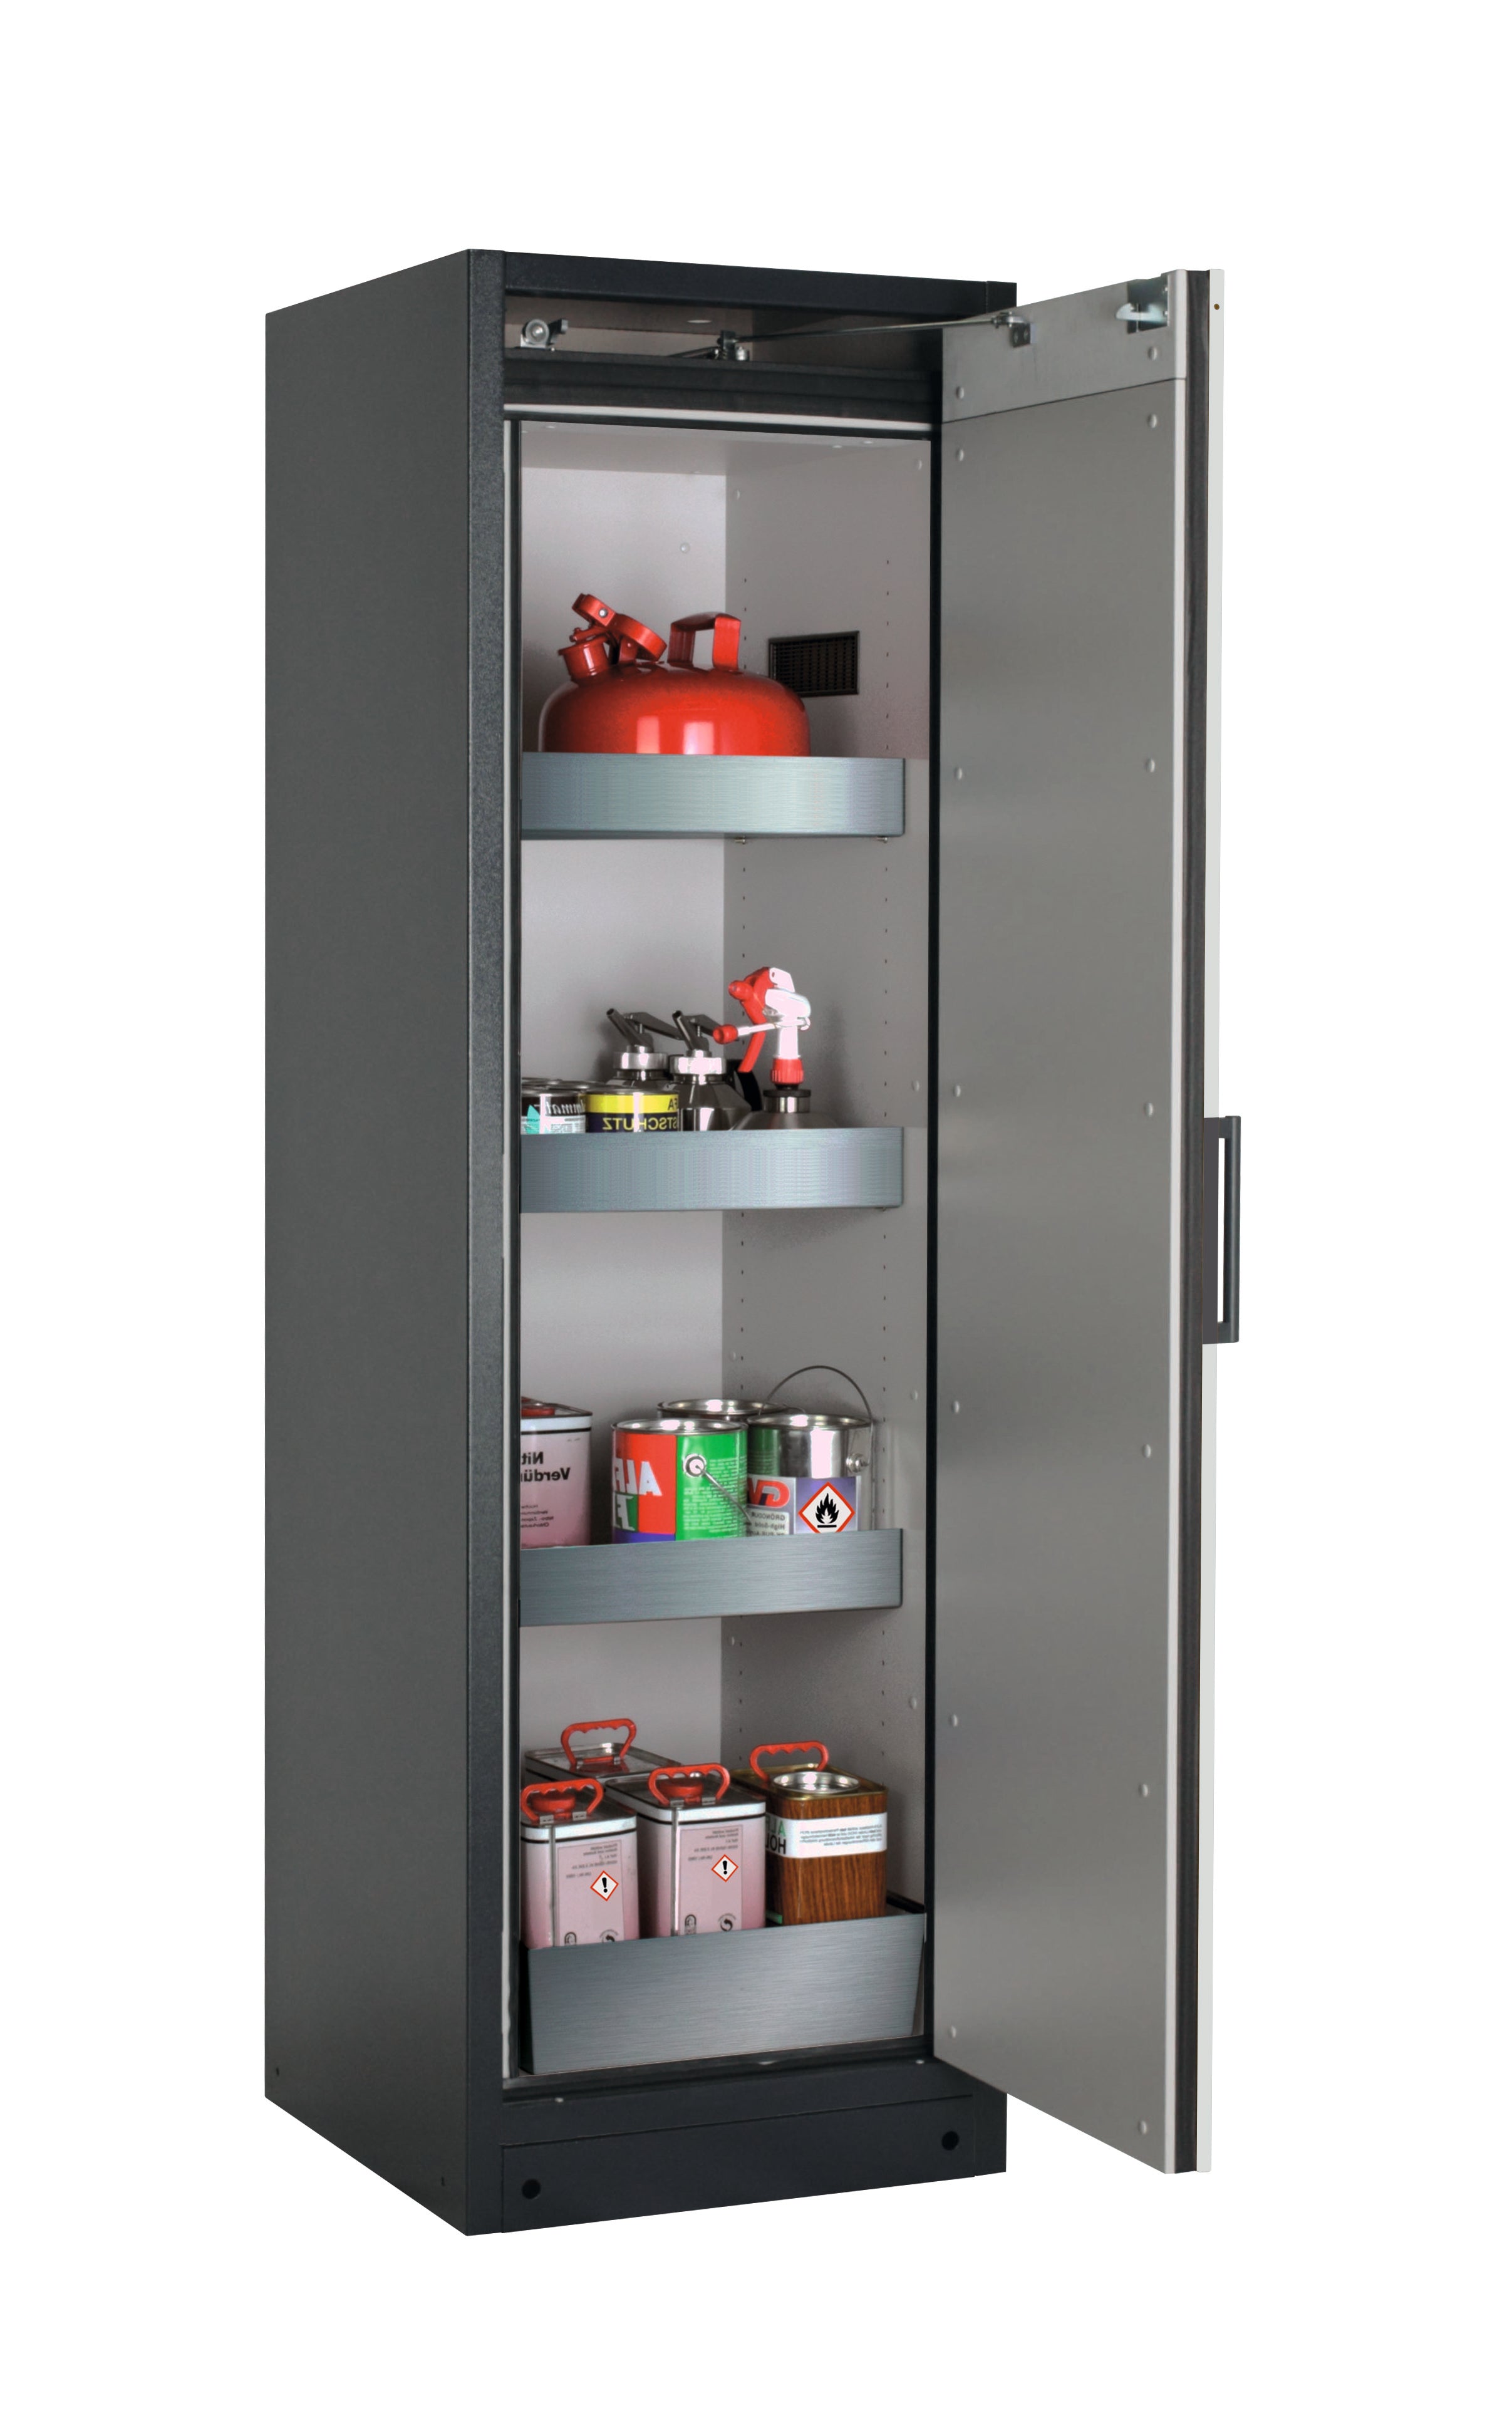 Type 90 safety storage cabinet Q-PEGASUS-90 model Q90.195.060.WDACR in light grey RAL 7035 with 3x tray shelf (standard) (stainless steel 1.4301),